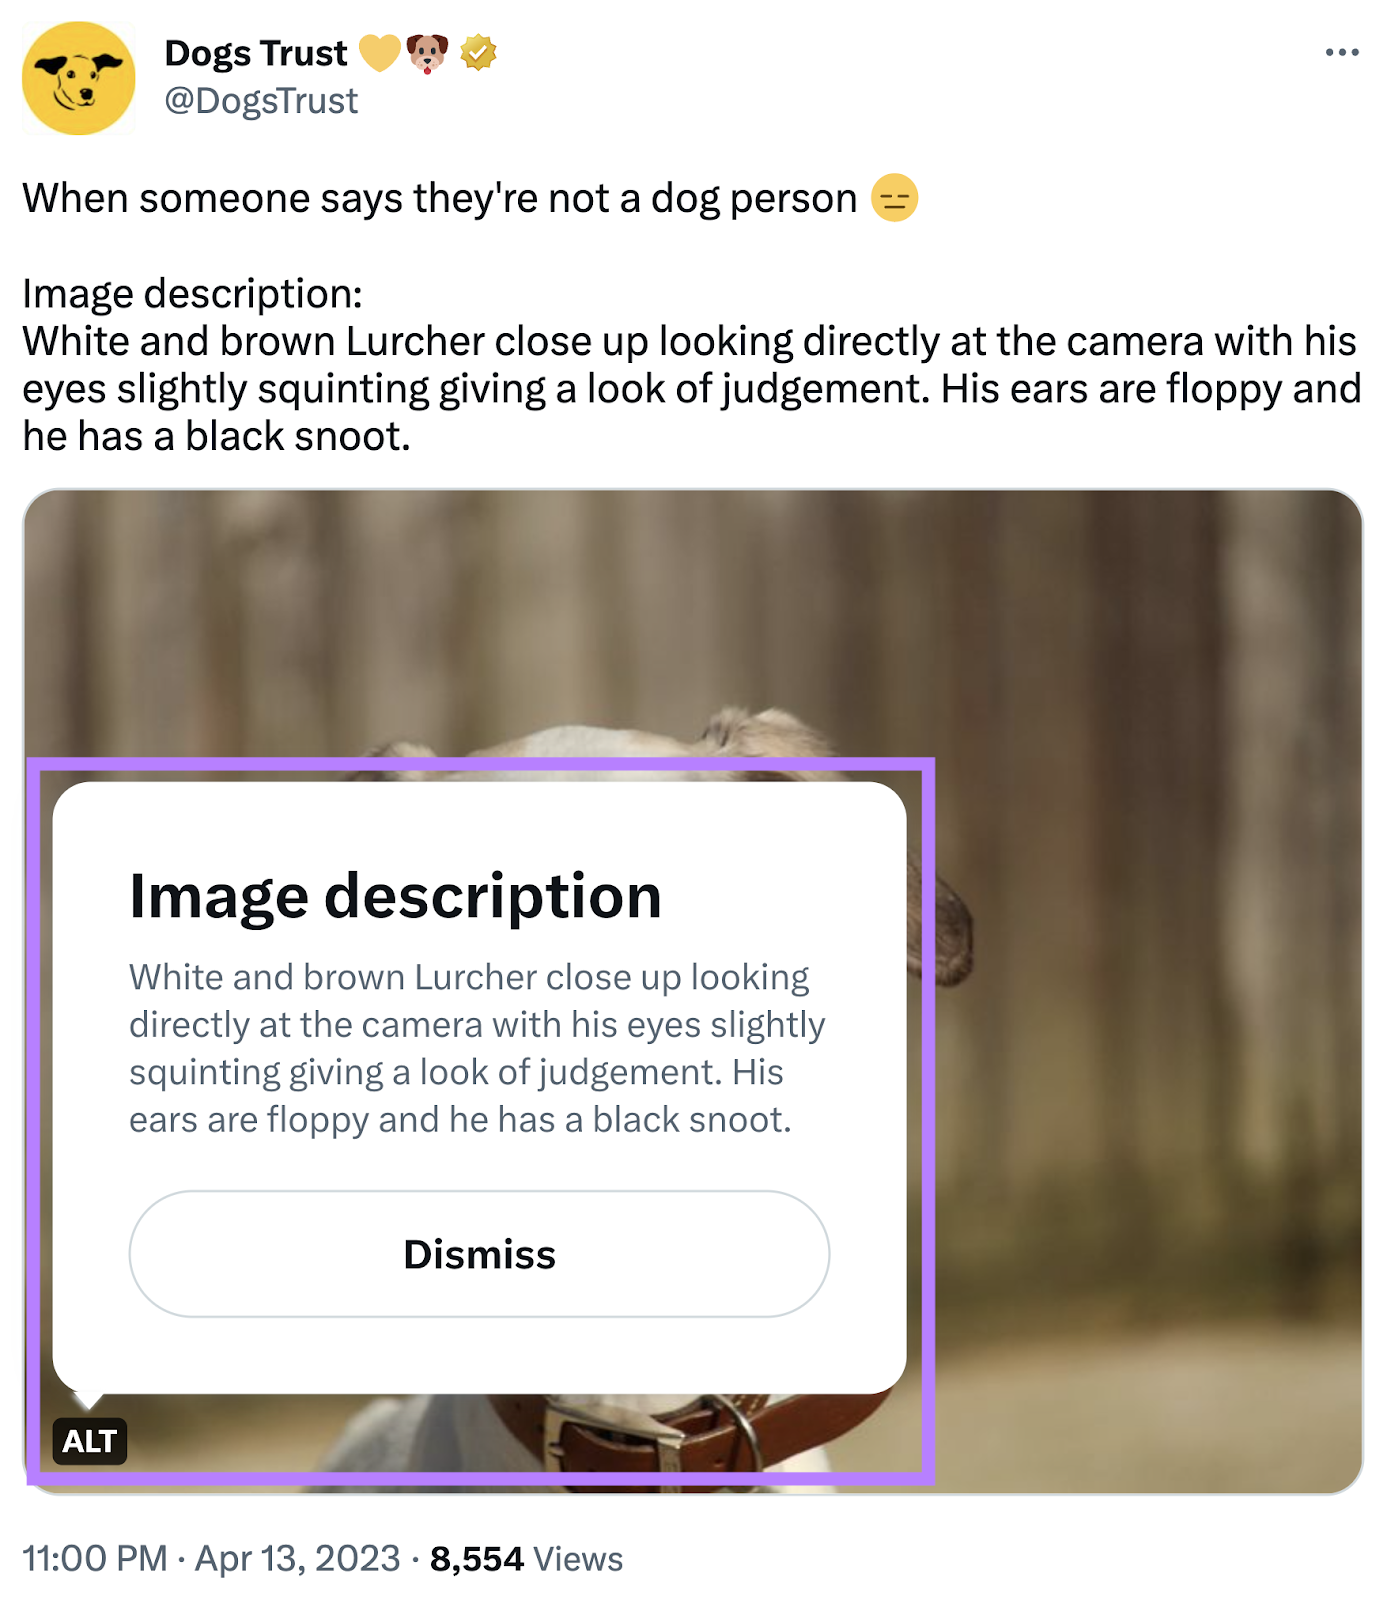 An image tweet from @DogsTrust. The "Alt" label on the image has been clicked, revealing an "Image description" dialog box.